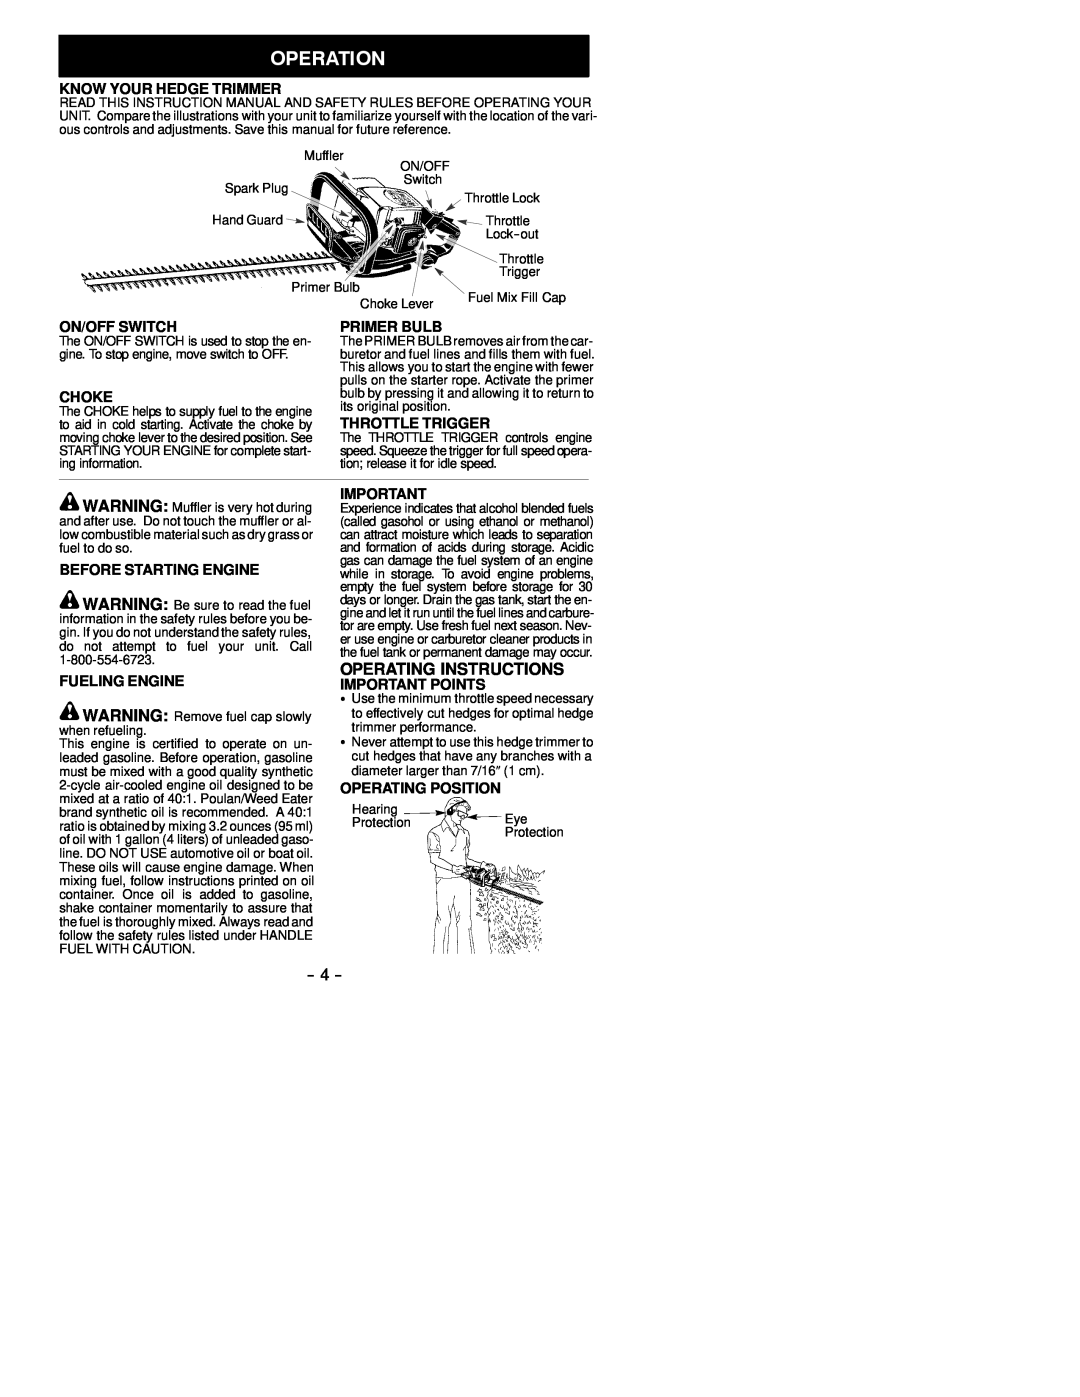 Weed Eater 530163751 Operating Instructions, Know Your Hedge Trimmer, On/Off Switch, Primer Bulb, Choke, Throttle Trigger 